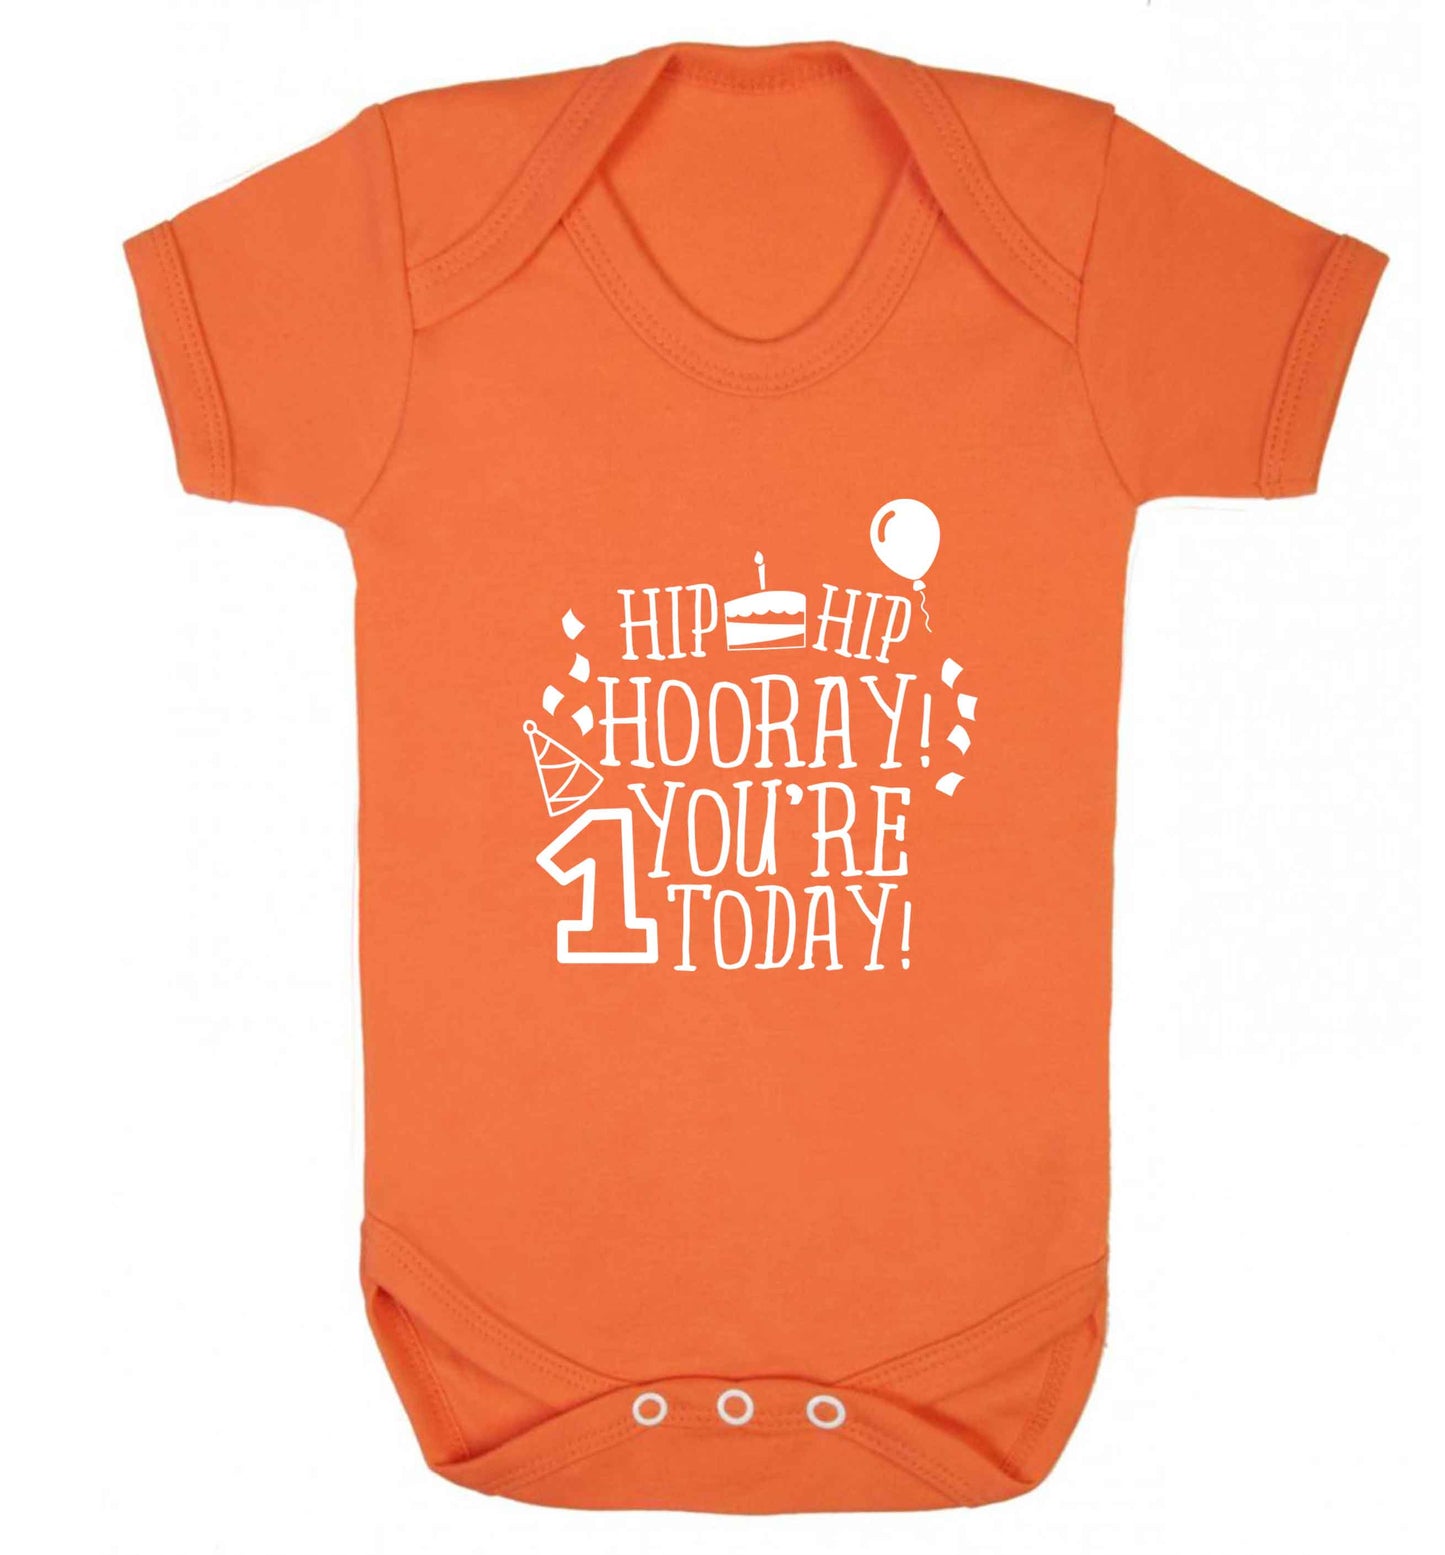 You're one today baby vest orange 18-24 months